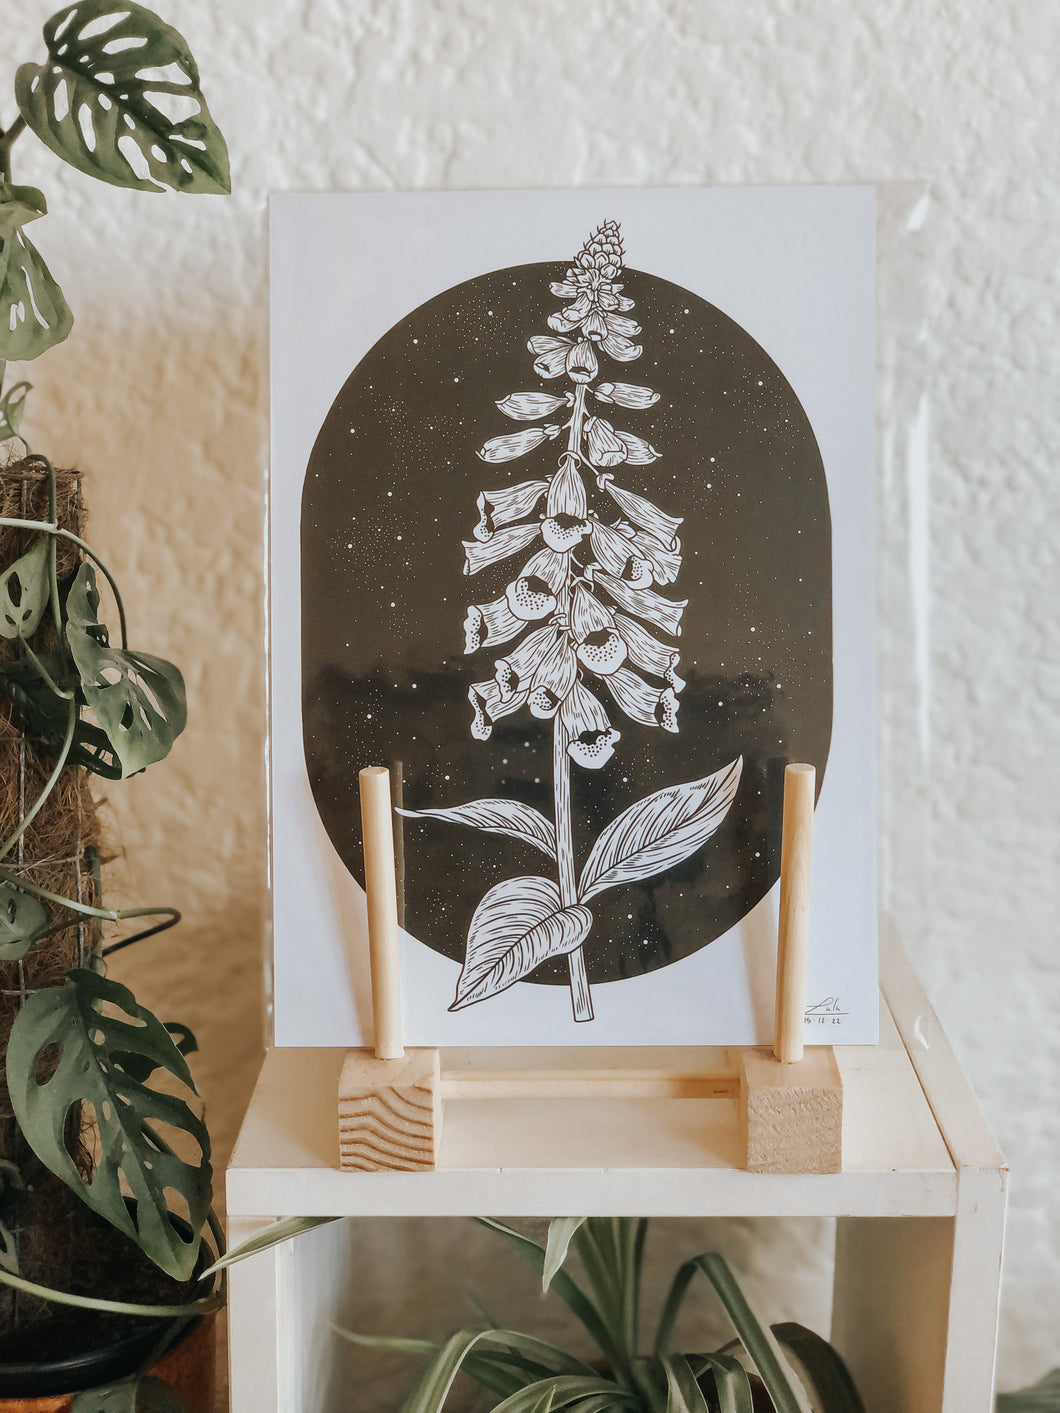 Black and white illustration of foxglove flowers and a stary night background. Simply download, print, frame and enjoy!